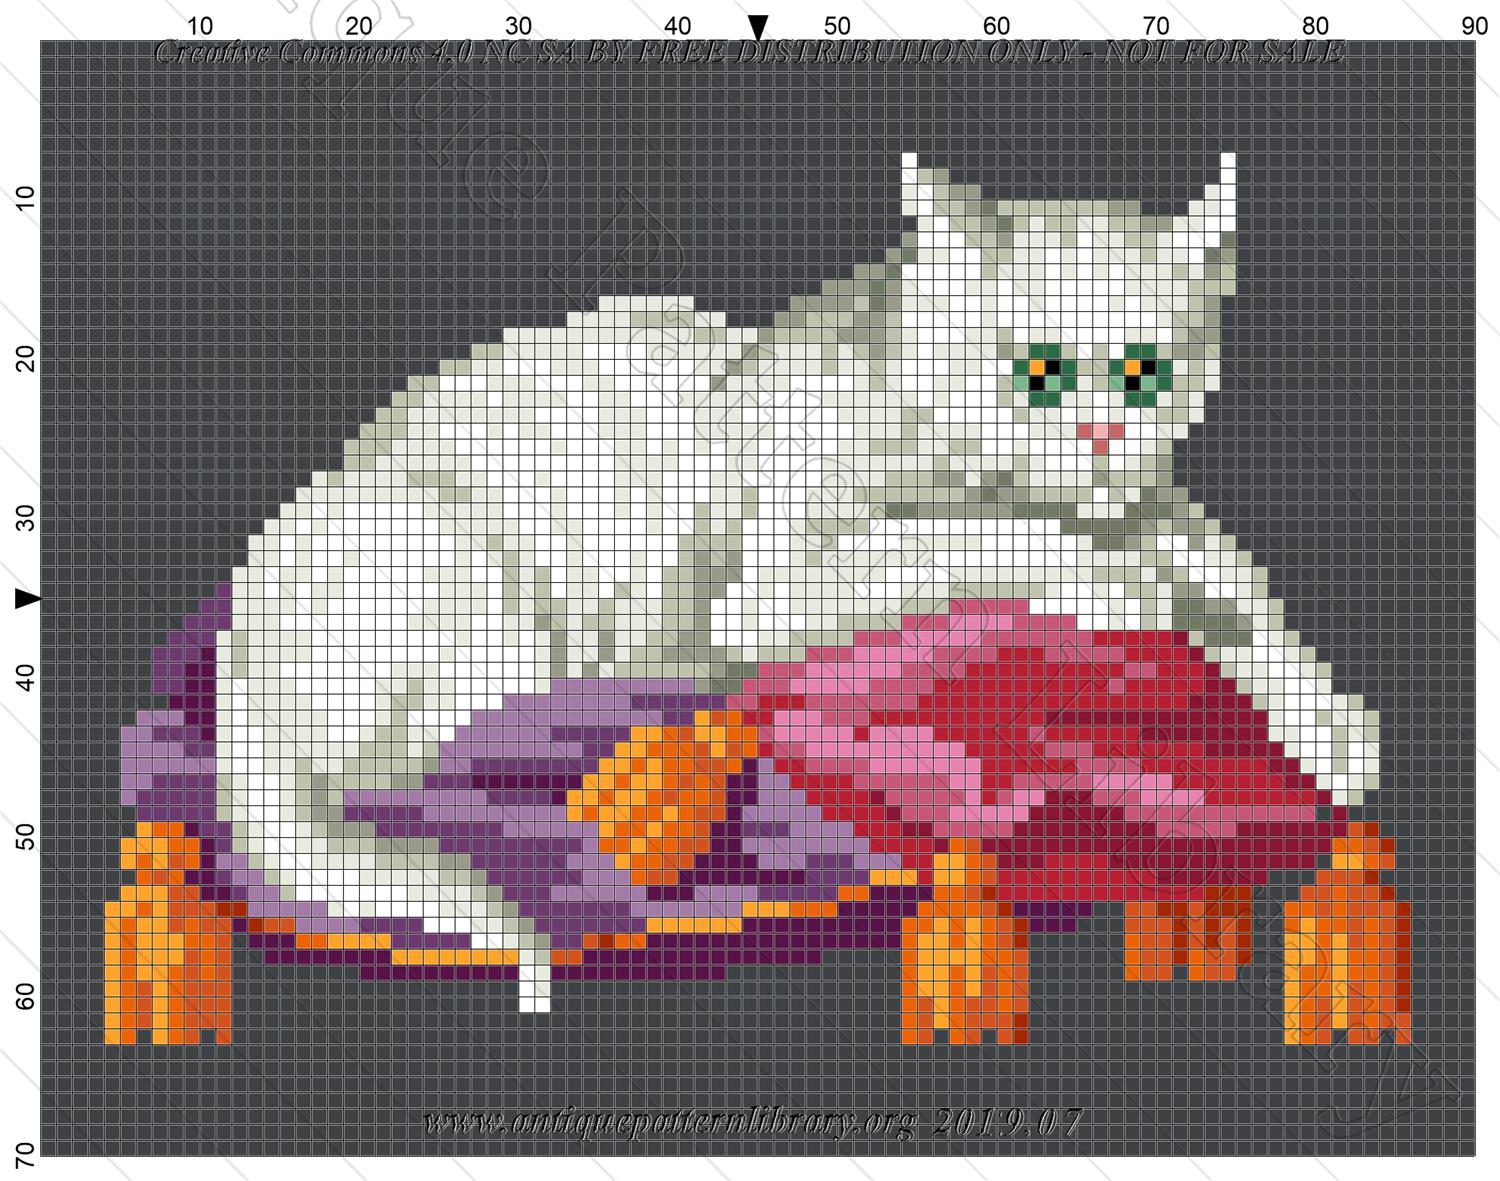 I-II006 White cat on red and purple pillows